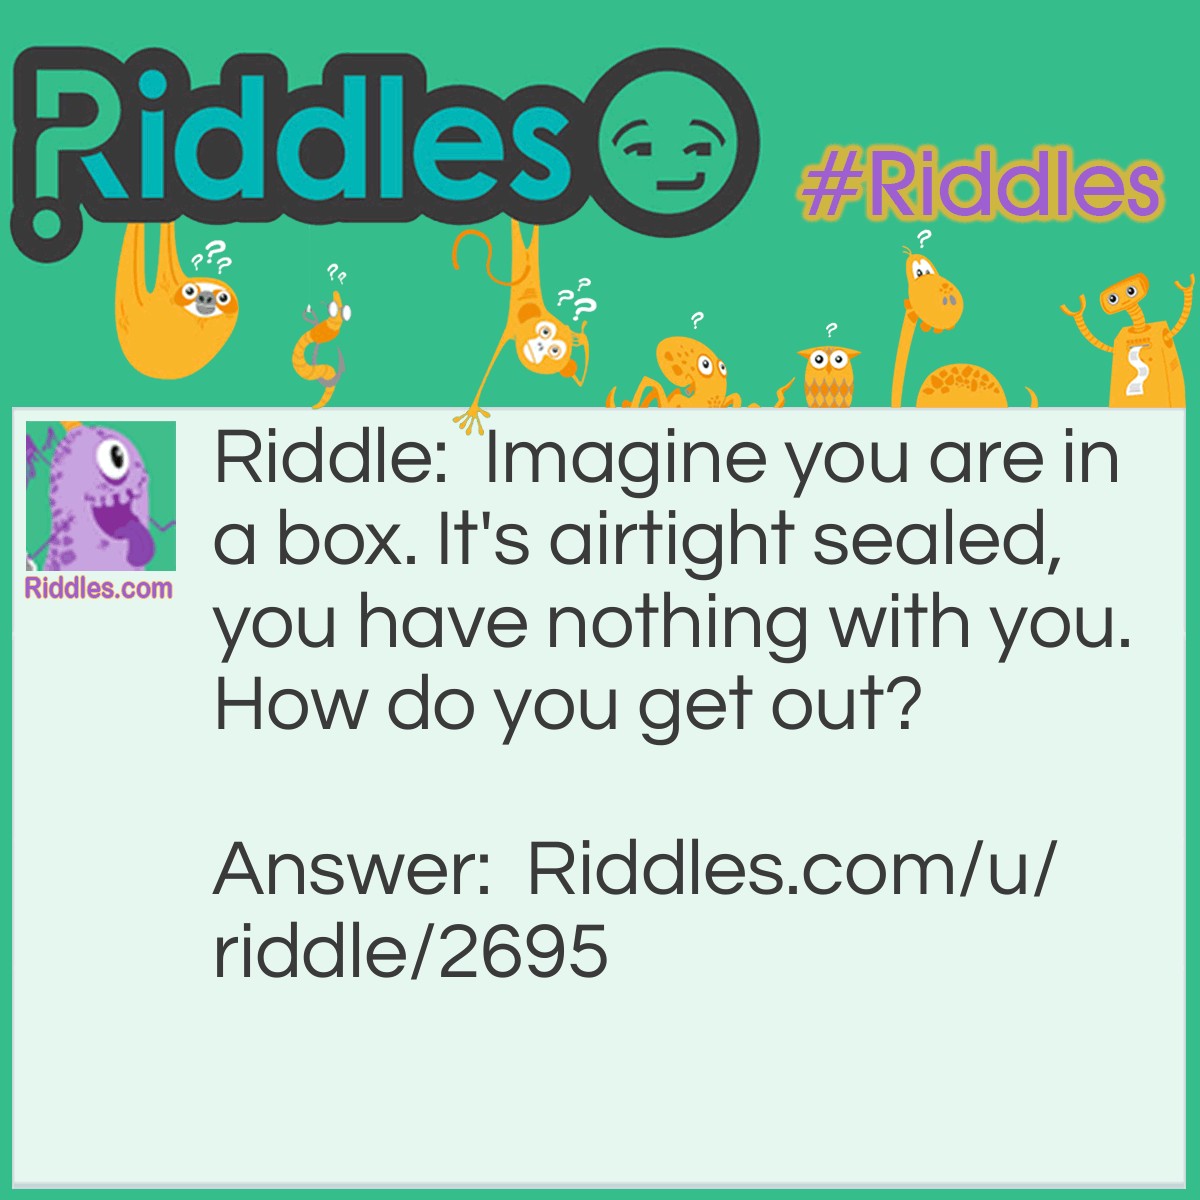 Riddle: Imagine you are in a box. It's airtight sealed, you have nothing with you. How do you get out? Answer: Stop imagining!